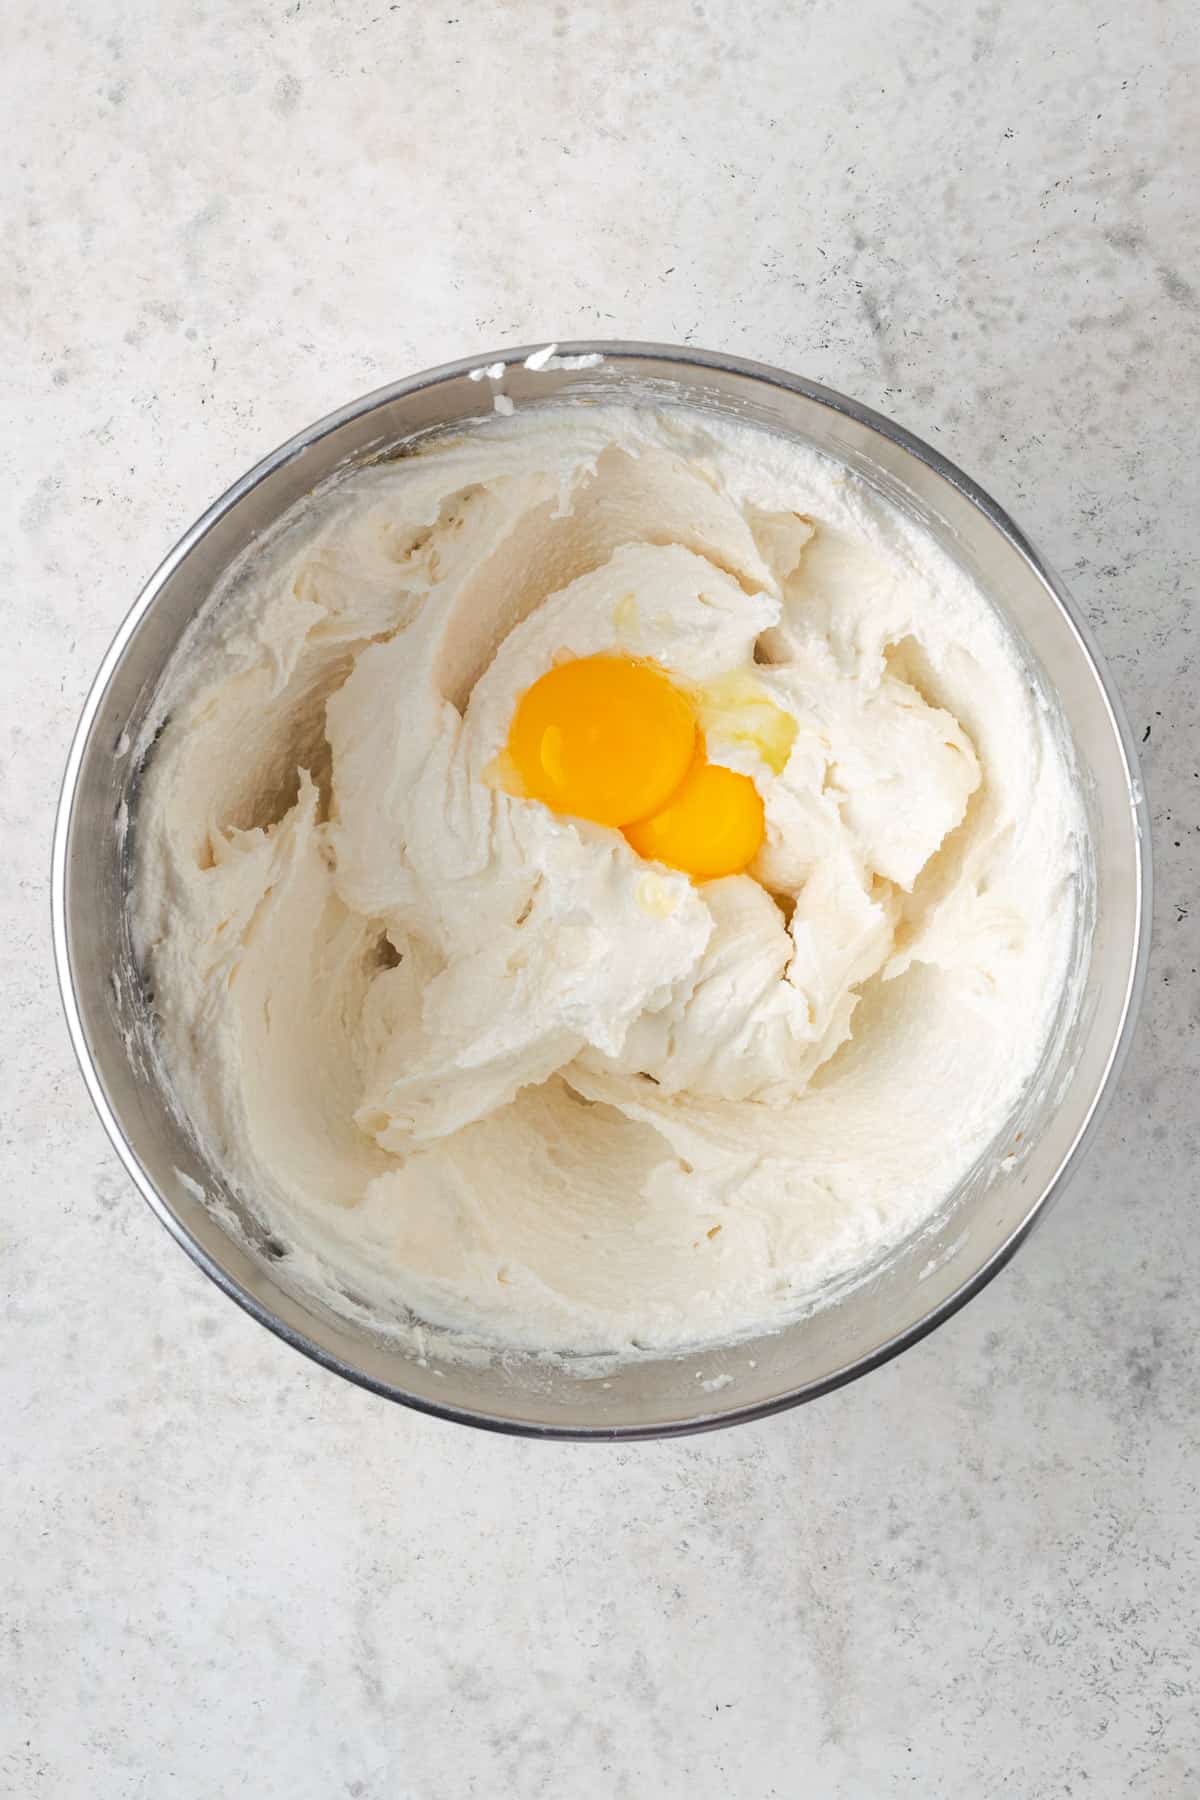 Egg yolks added to the mixing bowl with the partially mixed cake batter.